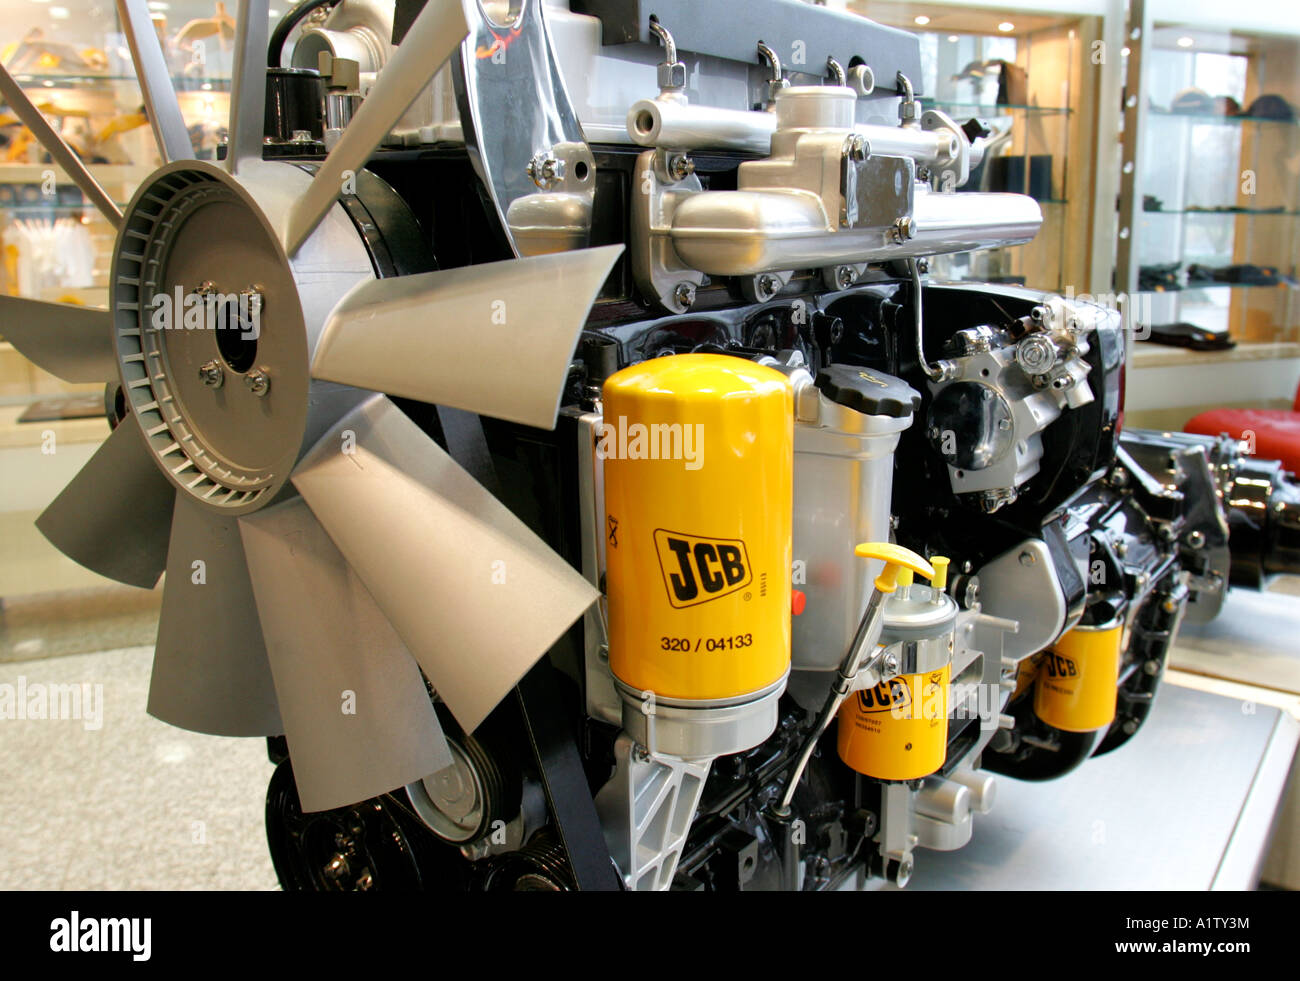 A diesel engine produced by the JCB engineering company based in Uttoxeter staffordshire uk producers construction equipment Stock Photo